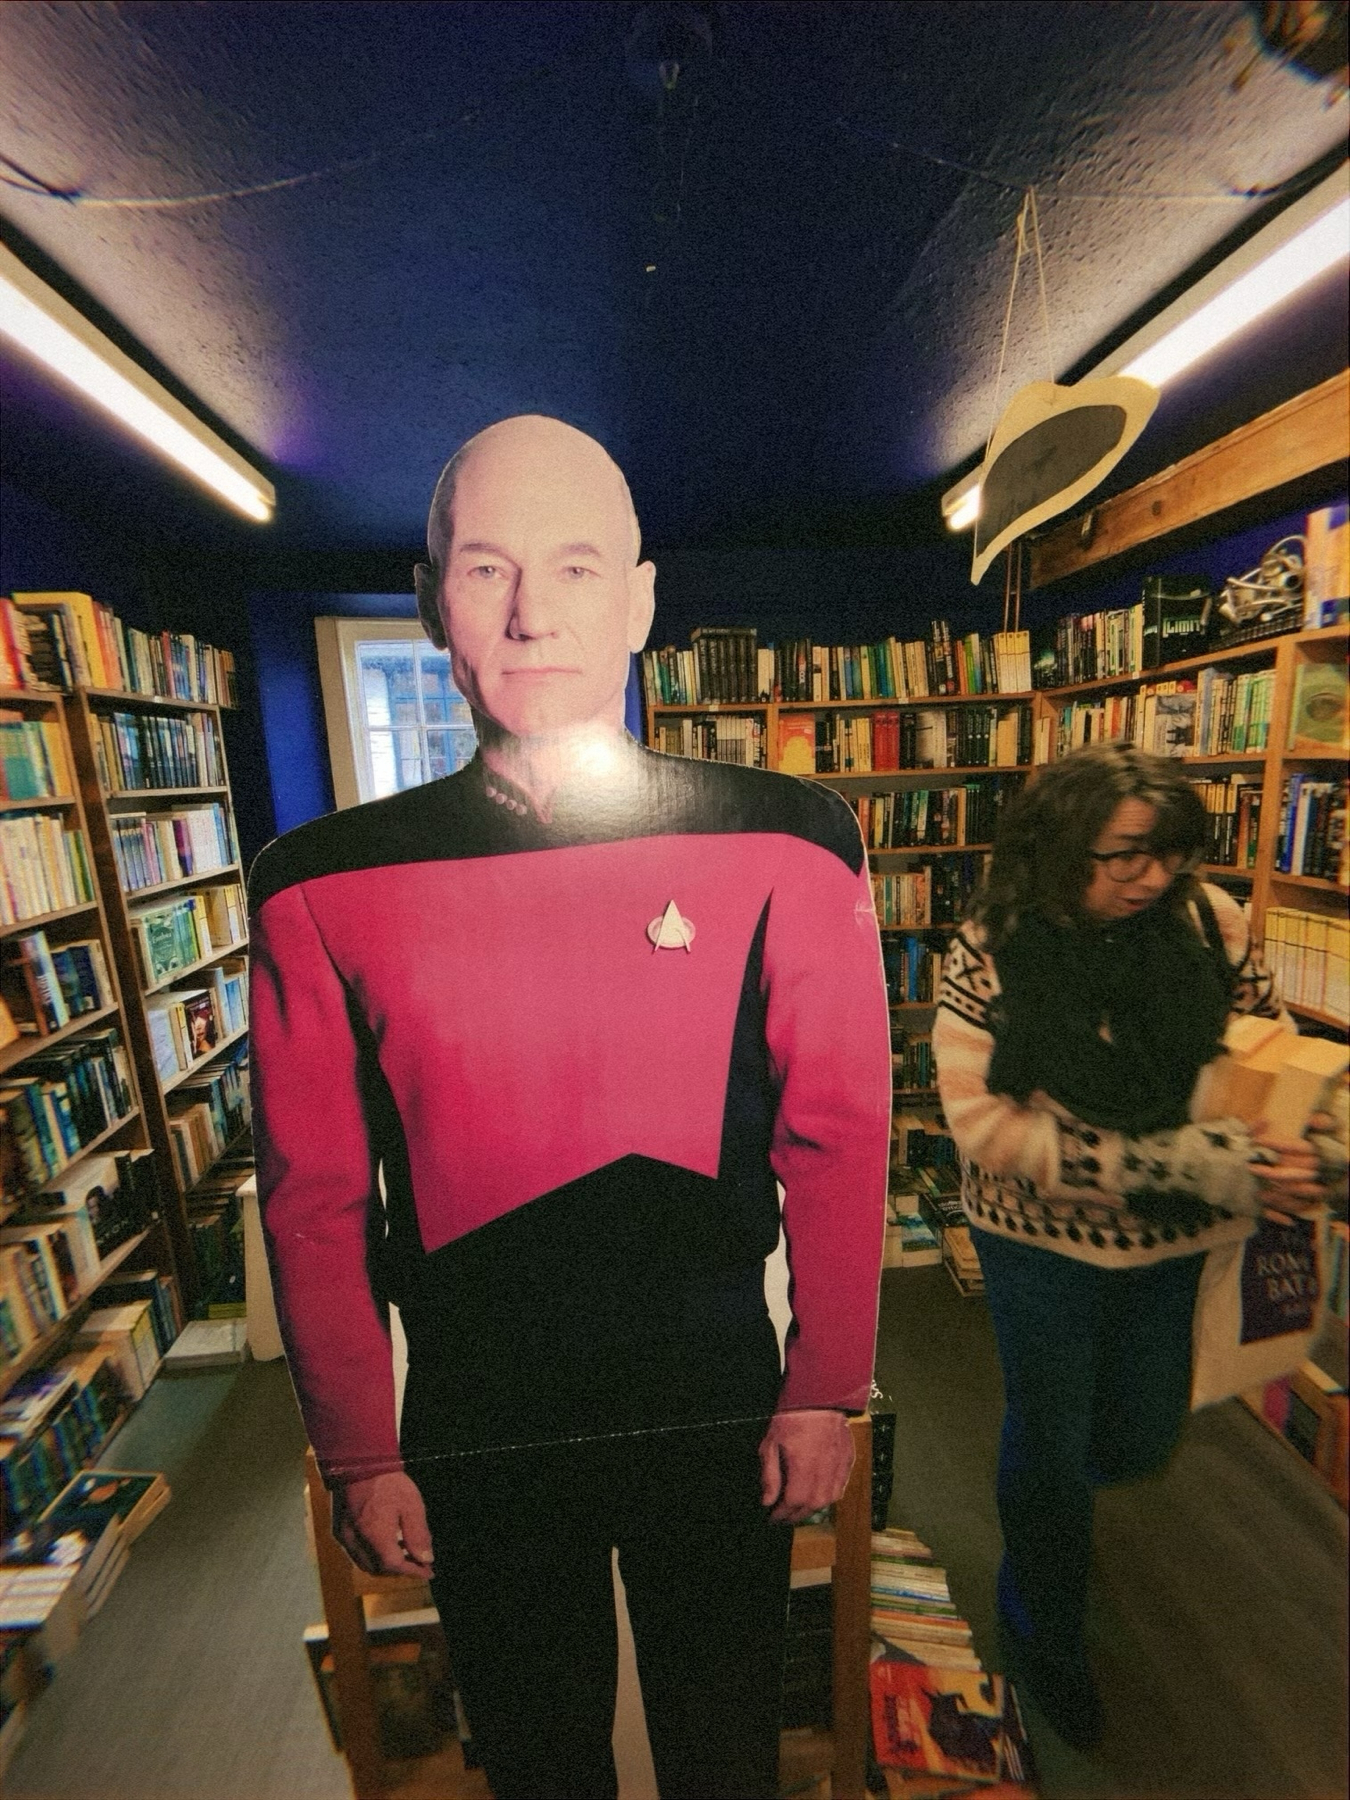 A cardboard cutout of a character in a red and black Starfleet uniform from Star Trek inside a bookstore with a woman carrying books walking in the background.